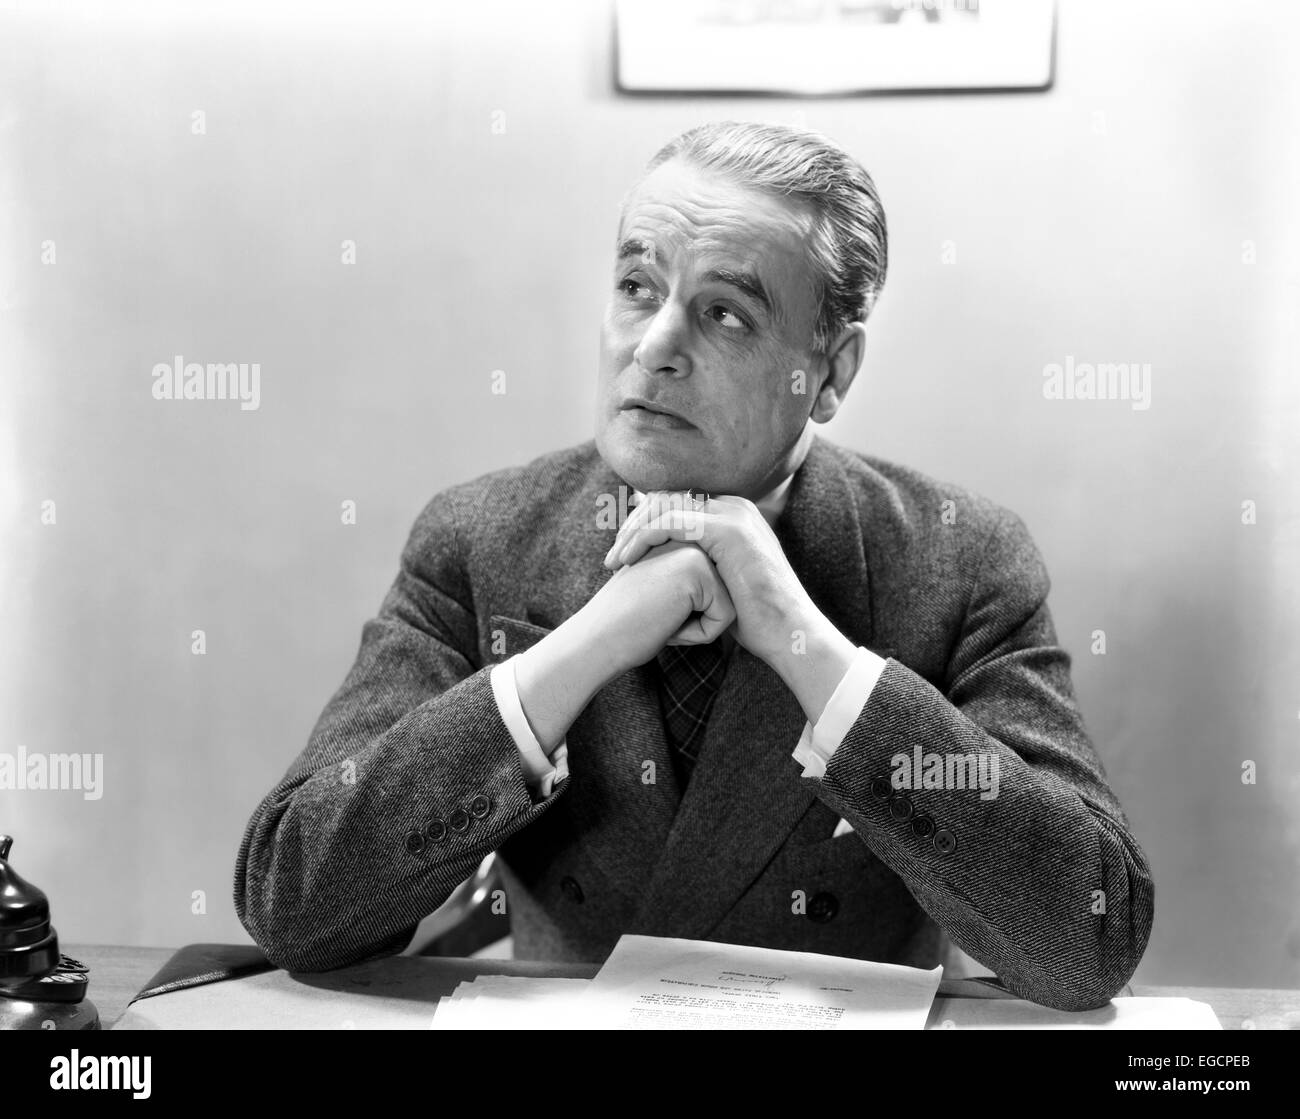 1930s 1940s MAN PORTRAIT AT DESK BUSINESSMAN WEARING SUIT HANDS CLASPED UNDER CHIN LOOKING OFF TO SIDE Stock Photo